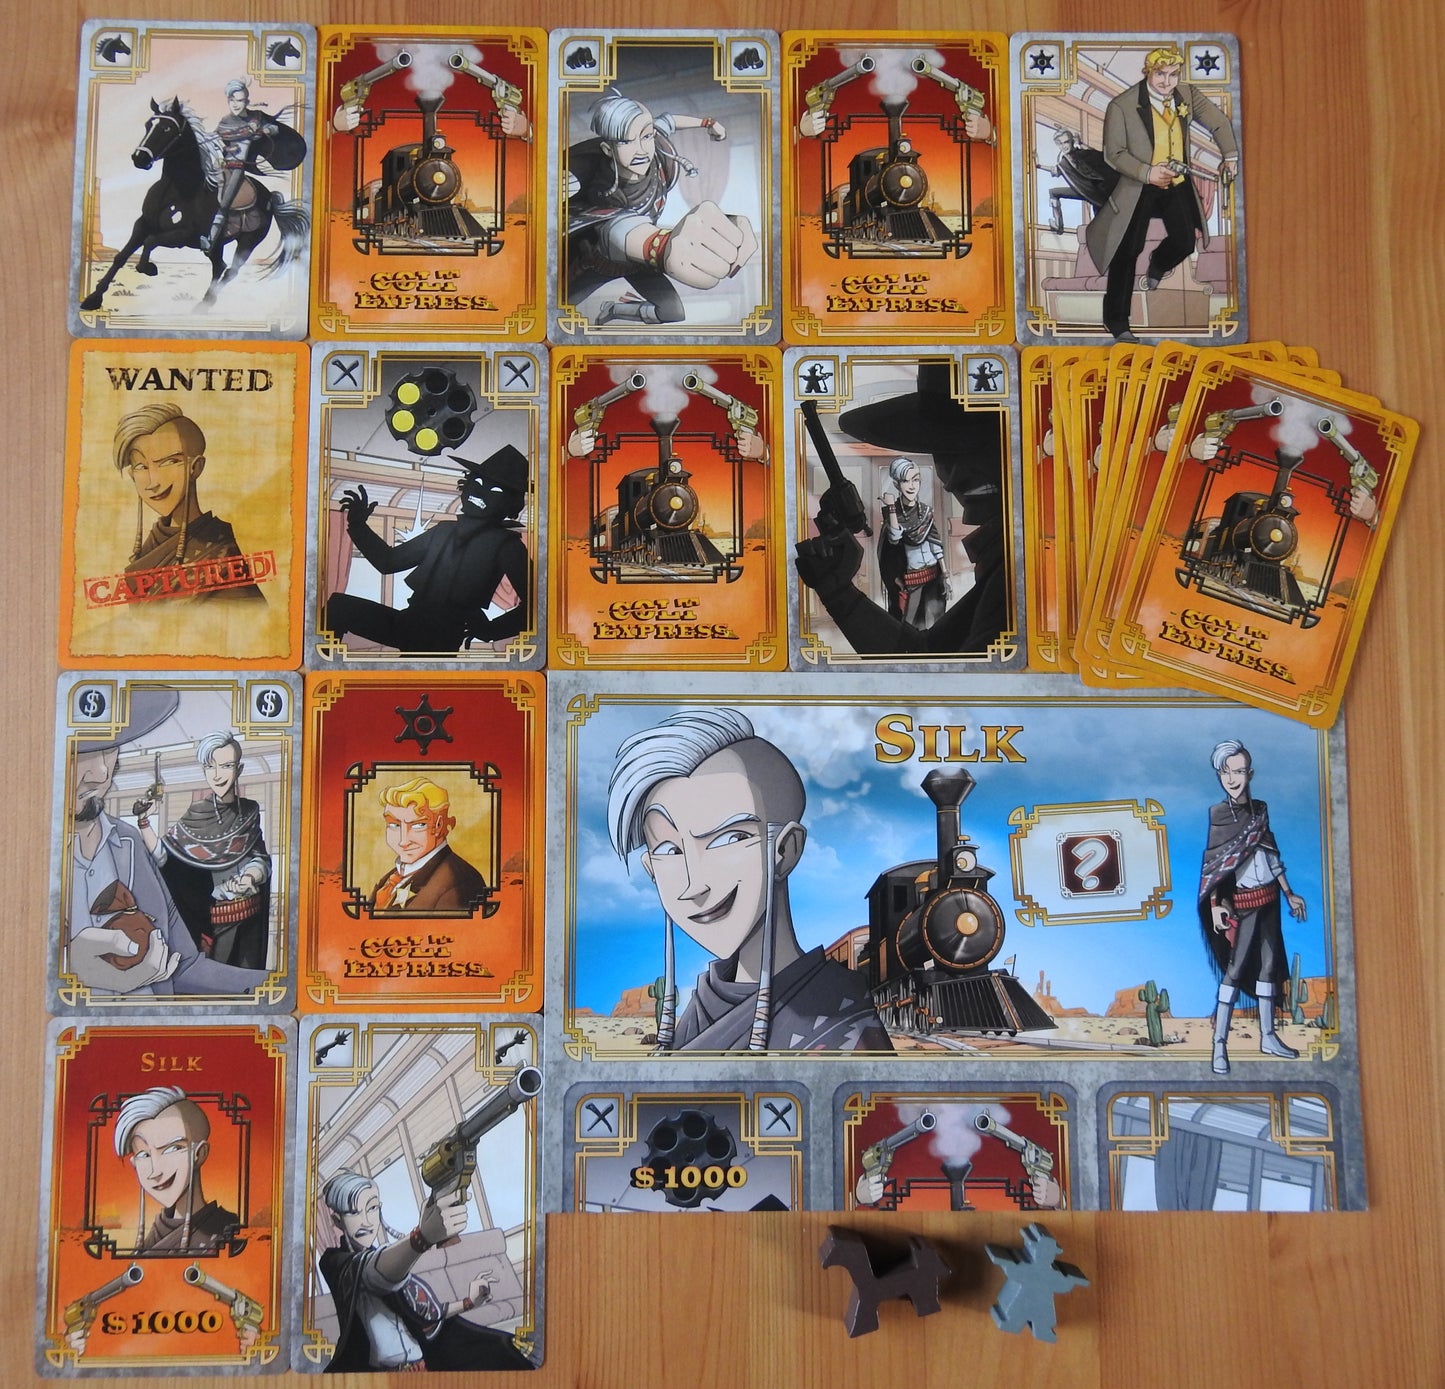 View of all the cards, sheets and wooden pieces included in the Colt Express Silk Bandit mini expansion.